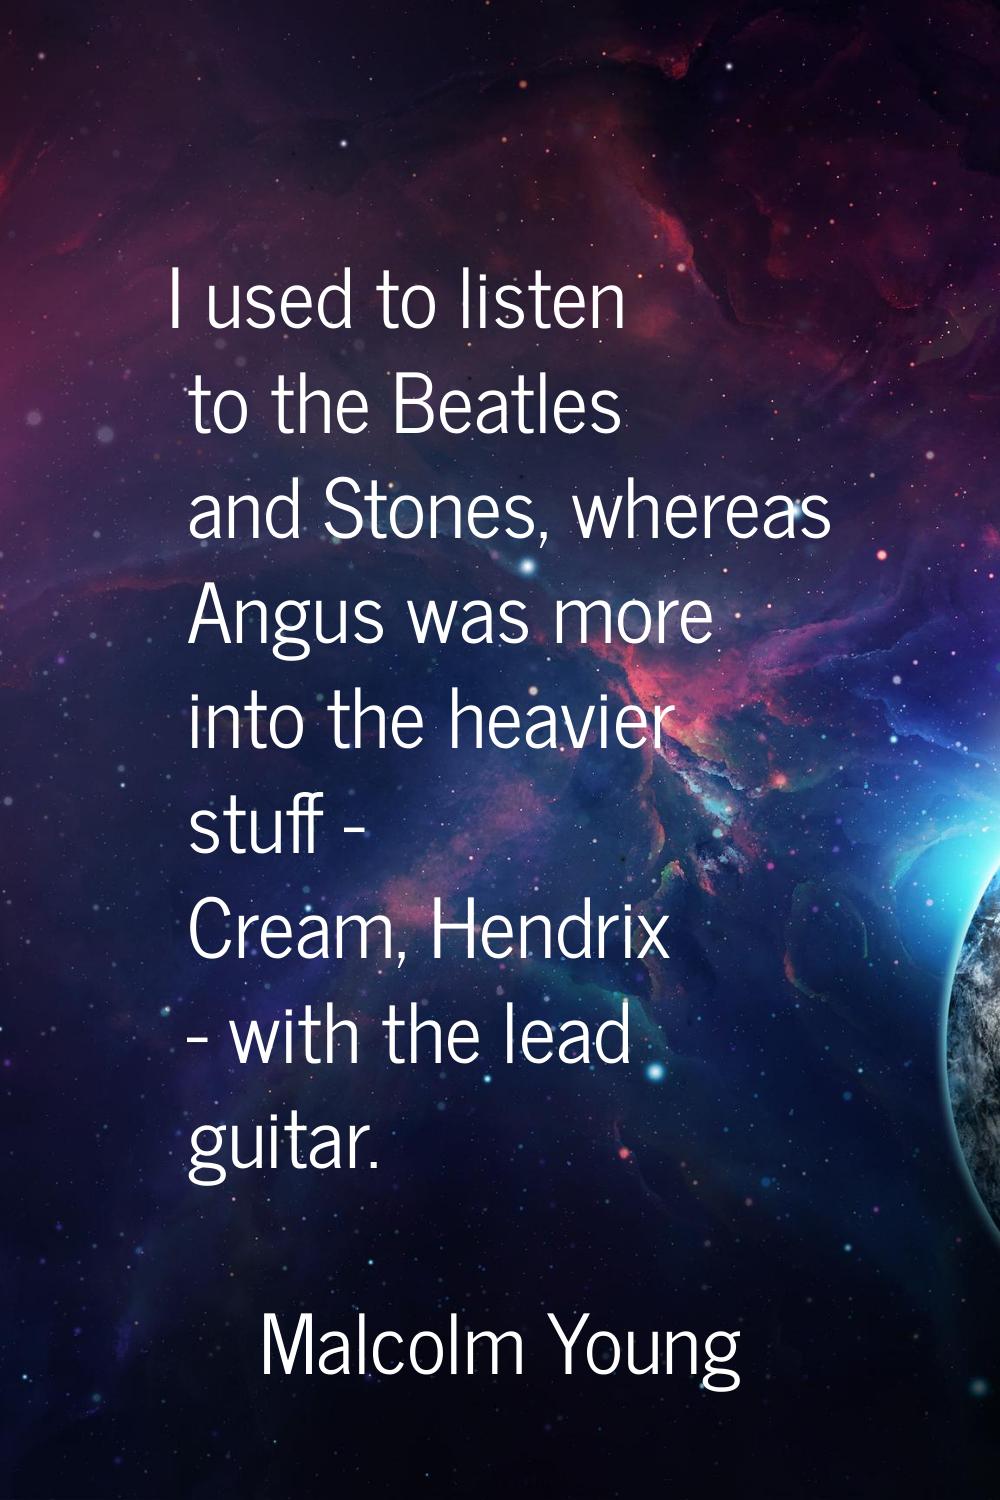 I used to listen to the Beatles and Stones, whereas Angus was more into the heavier stuff - Cream, 